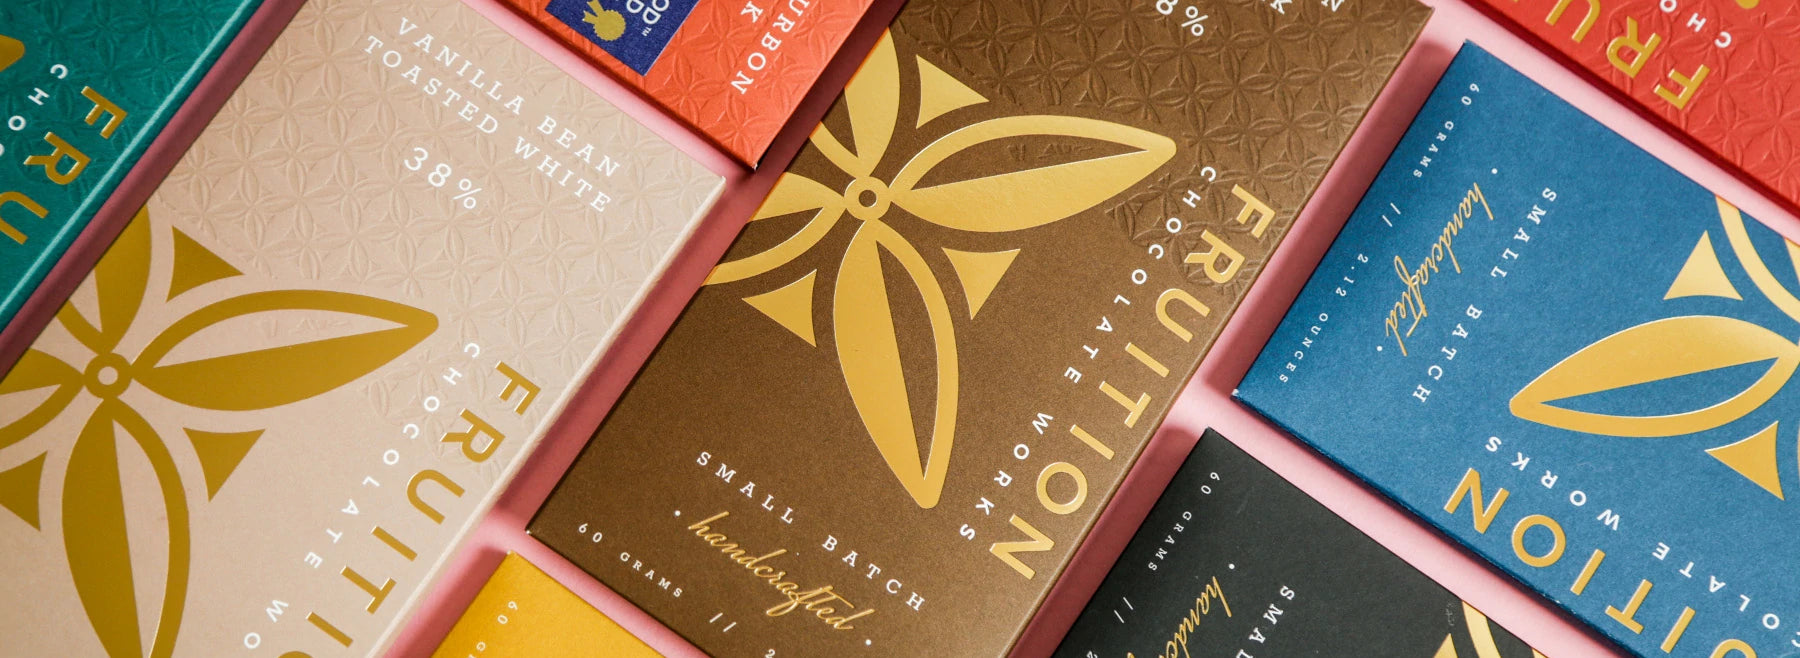 Wholesale Chocolate - Fruition Chocolate Works